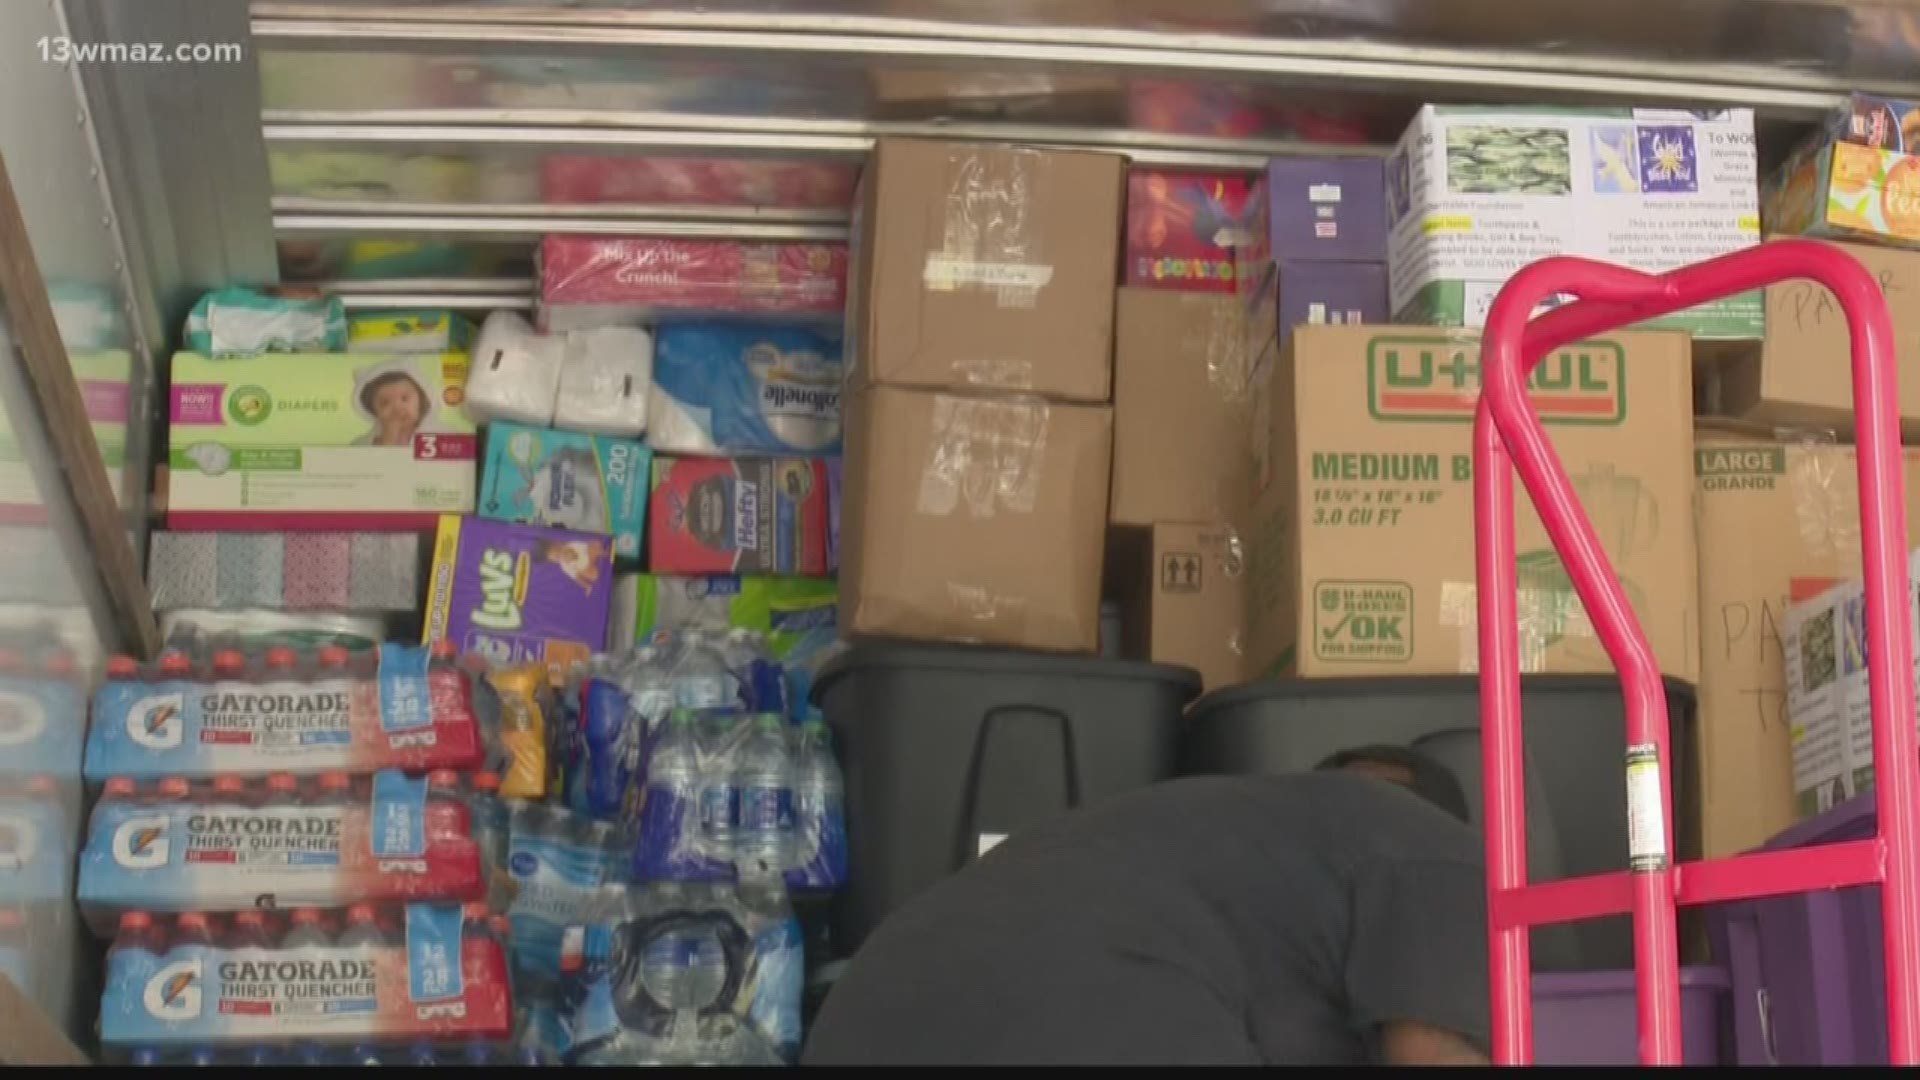 Former Junior Journalist Malik Lyder and his family organized a relief drive for the Bahamas. Now, they're getting ready to deliver those supplies.